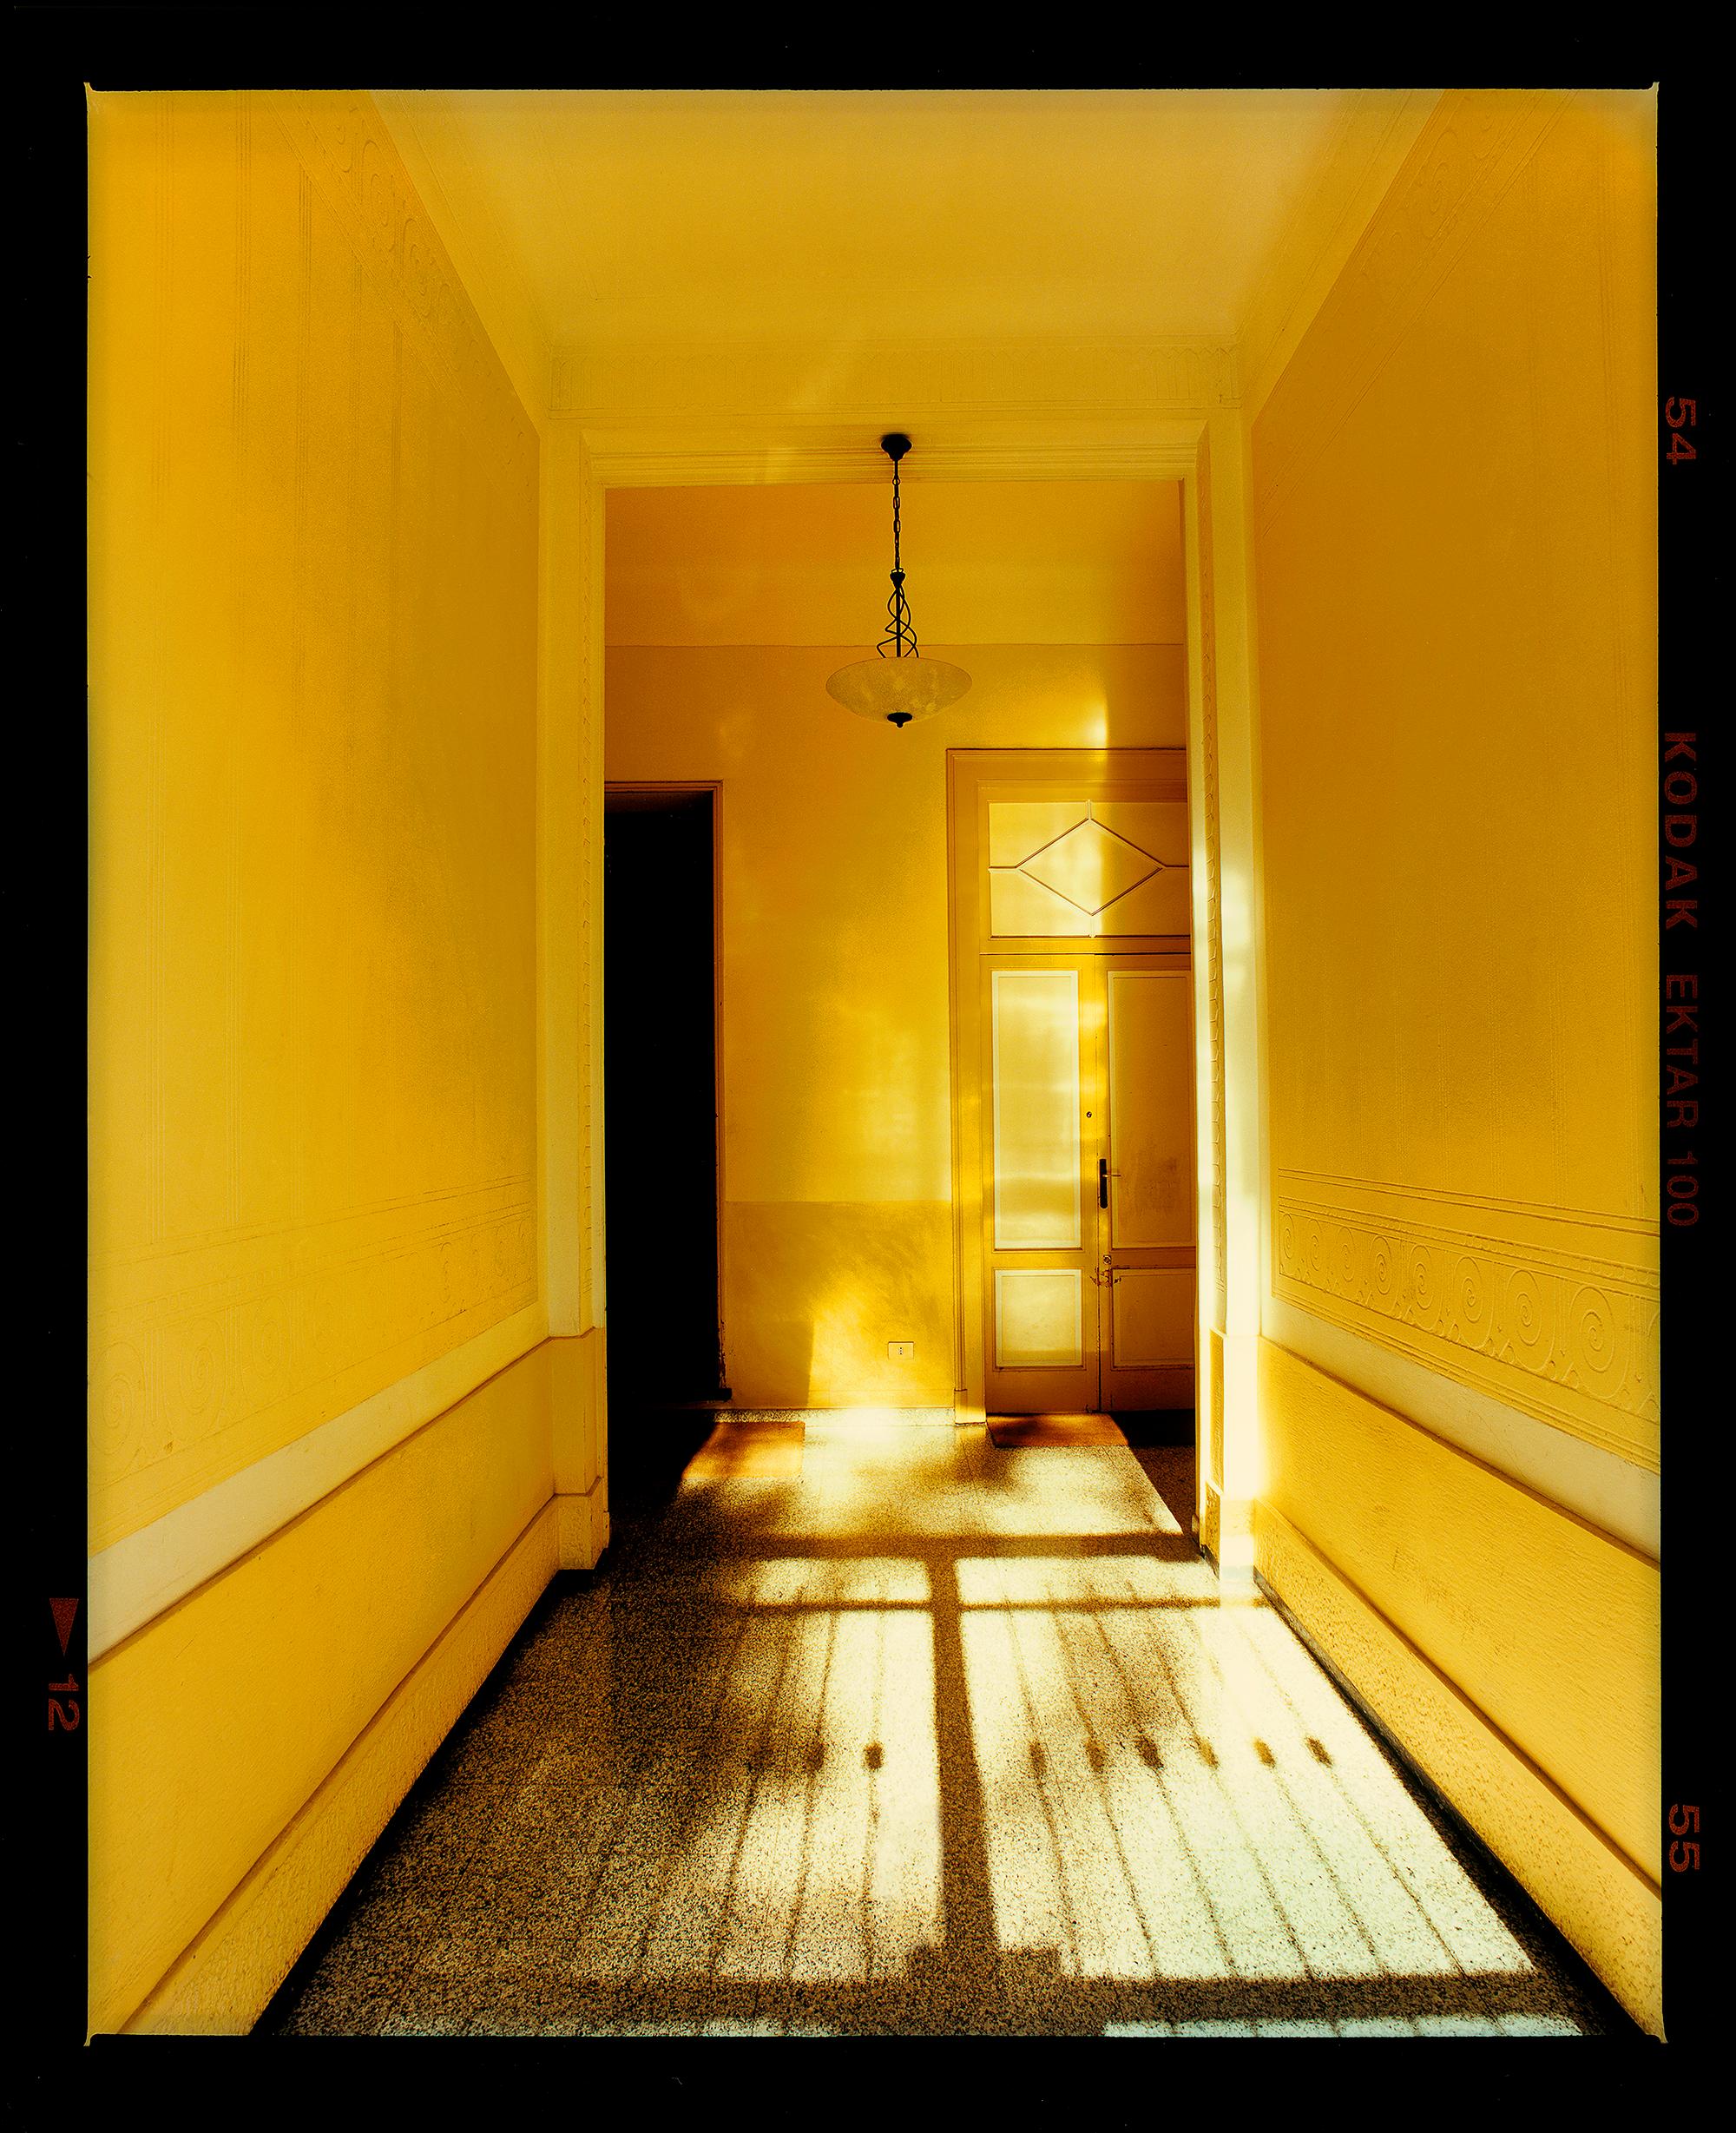 Yellow Corridor (Day), from Richard Heeps series A Short History of Milan which began as a special project for the 2018 Affordable Art Fair Milan. It was well received and the artwork has become popular with art buyers around the world. Richard